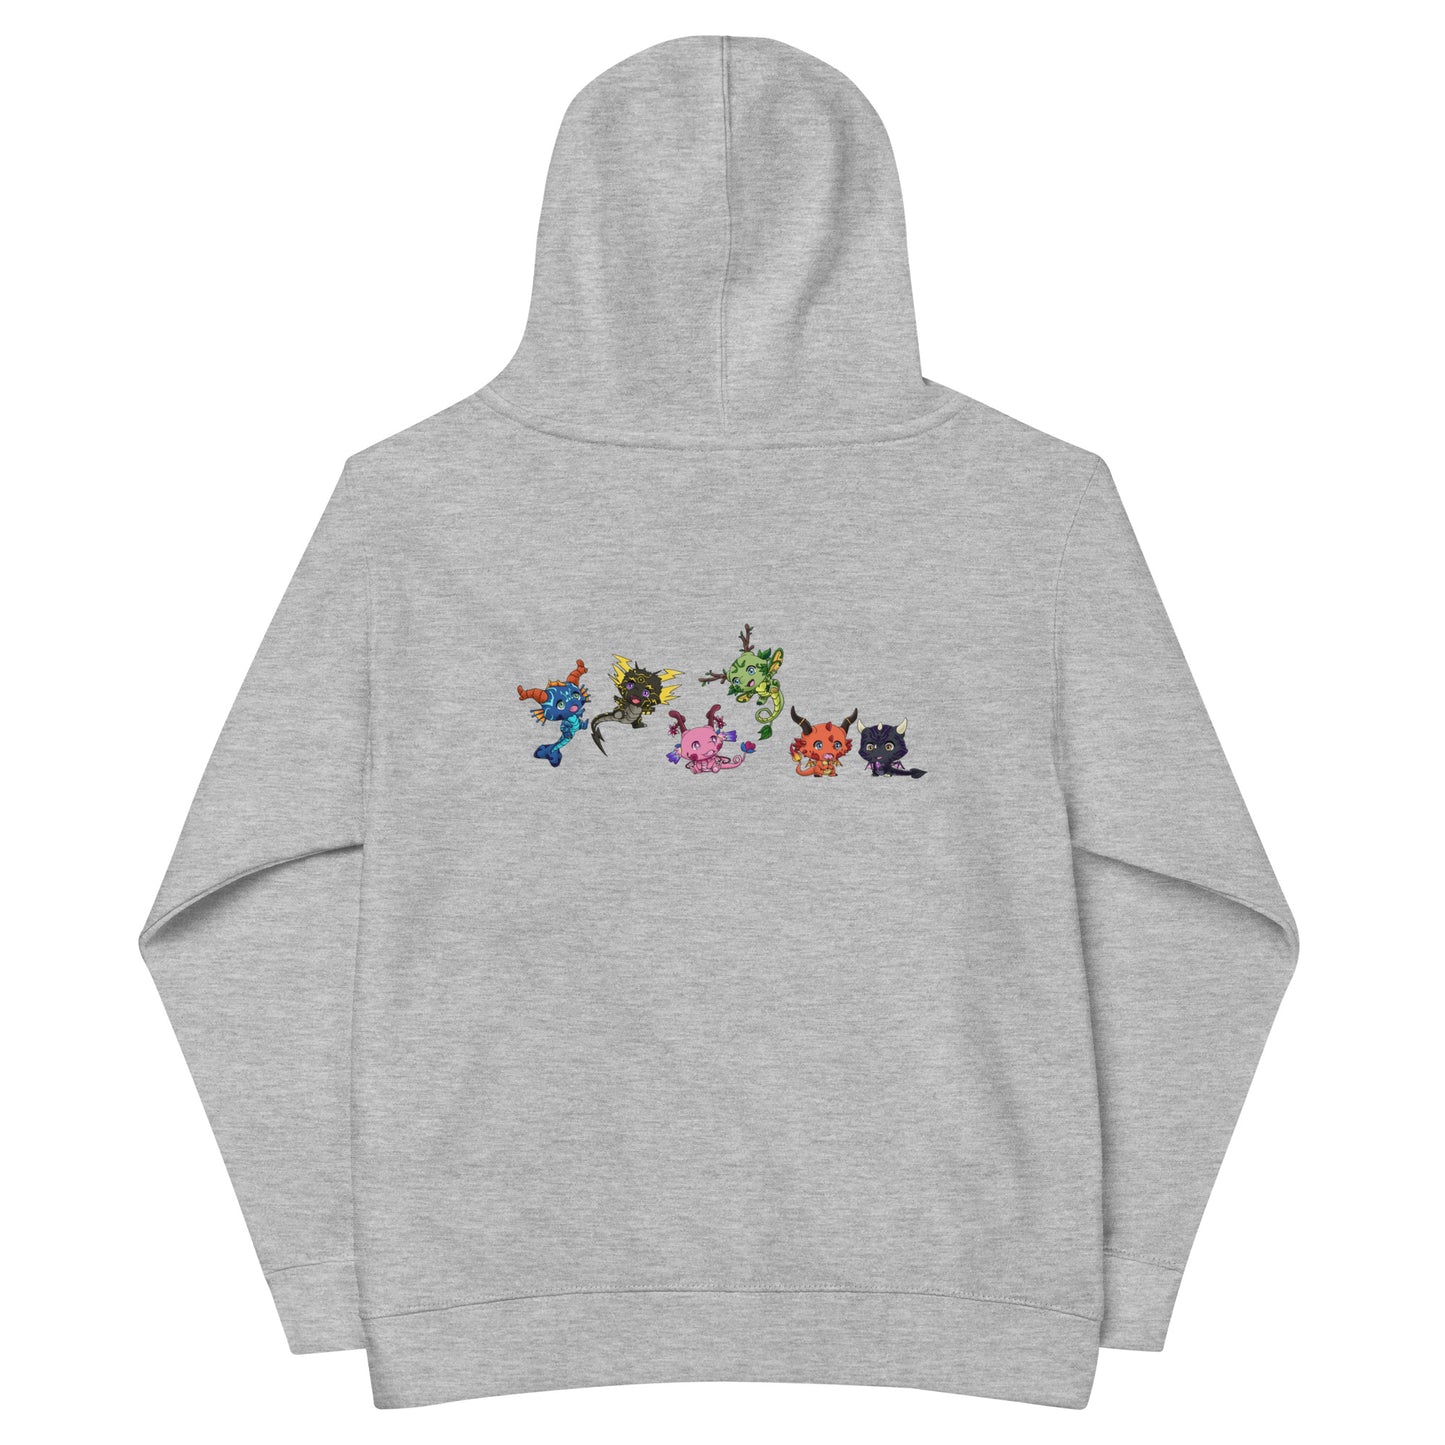 Youth Communication Hoodie